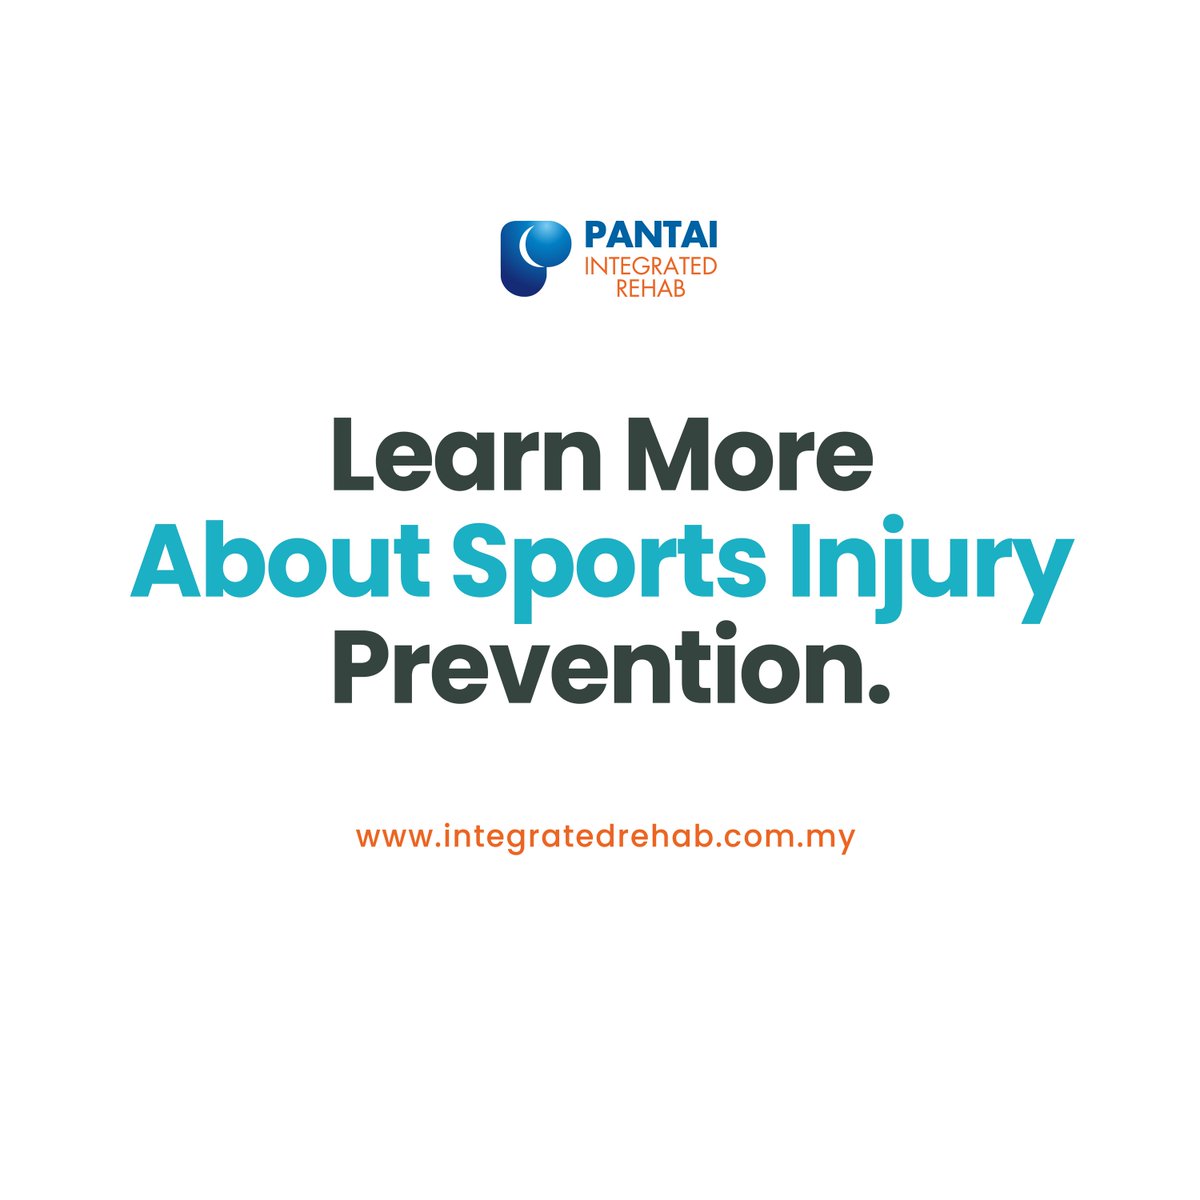 👉 Share this post with your fellow gym members, sports enthusiast and spread the knowledge on preventing sports injuries in men! 🤝📲

#InjuryPrevention #StayInTheGame #SportsInjuries #Men'sHealth